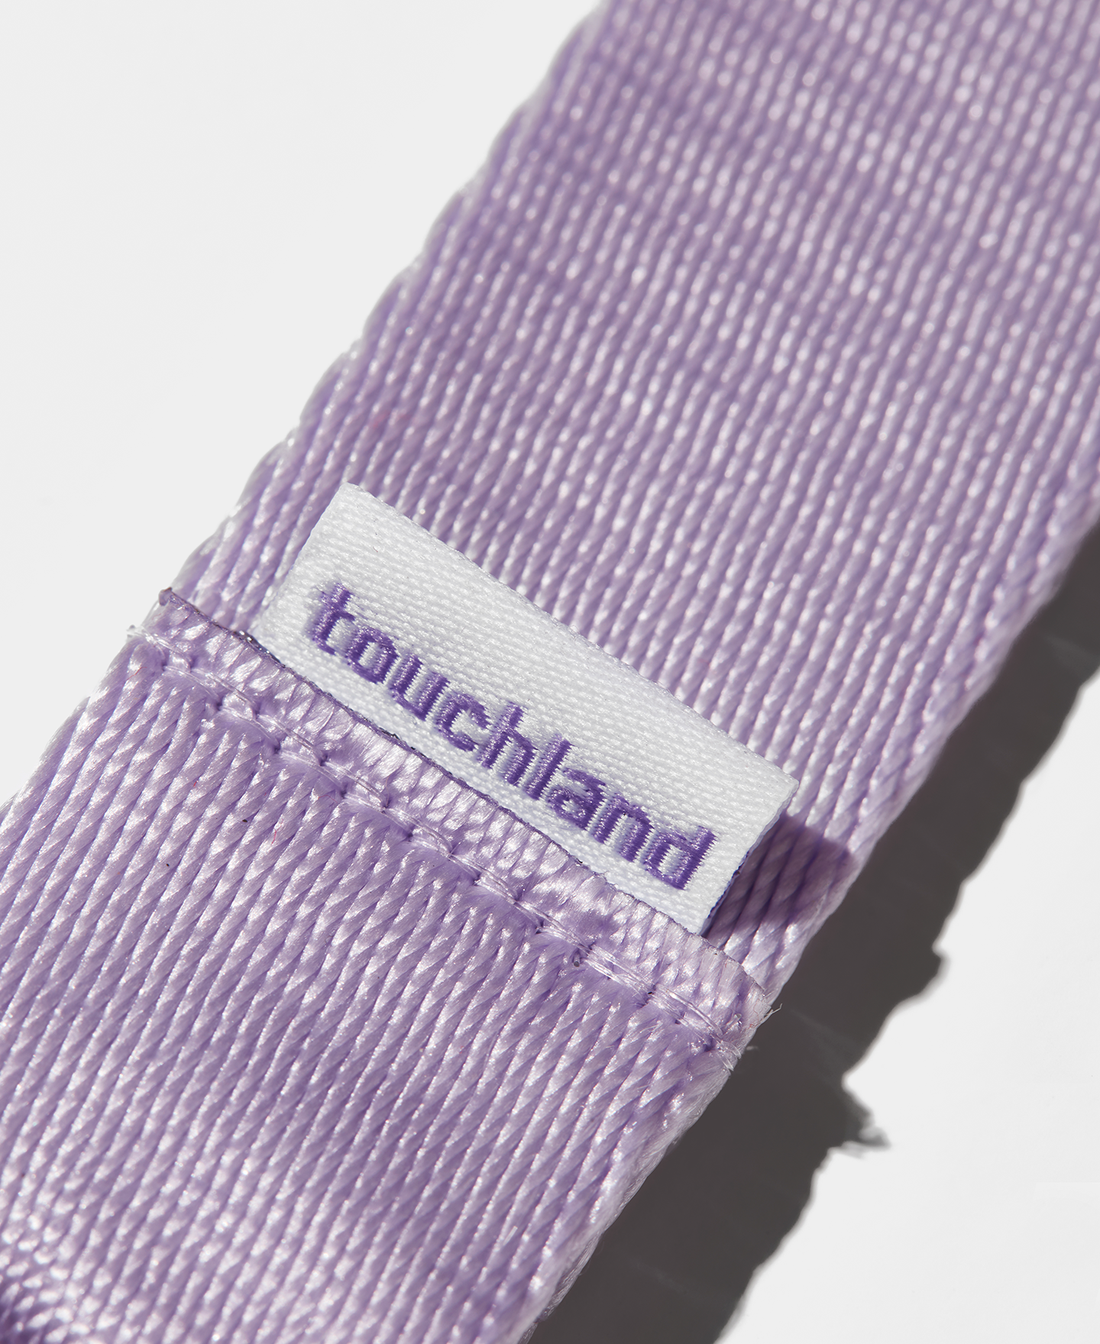 Purple lanyard zoomed in on touchland label on white background